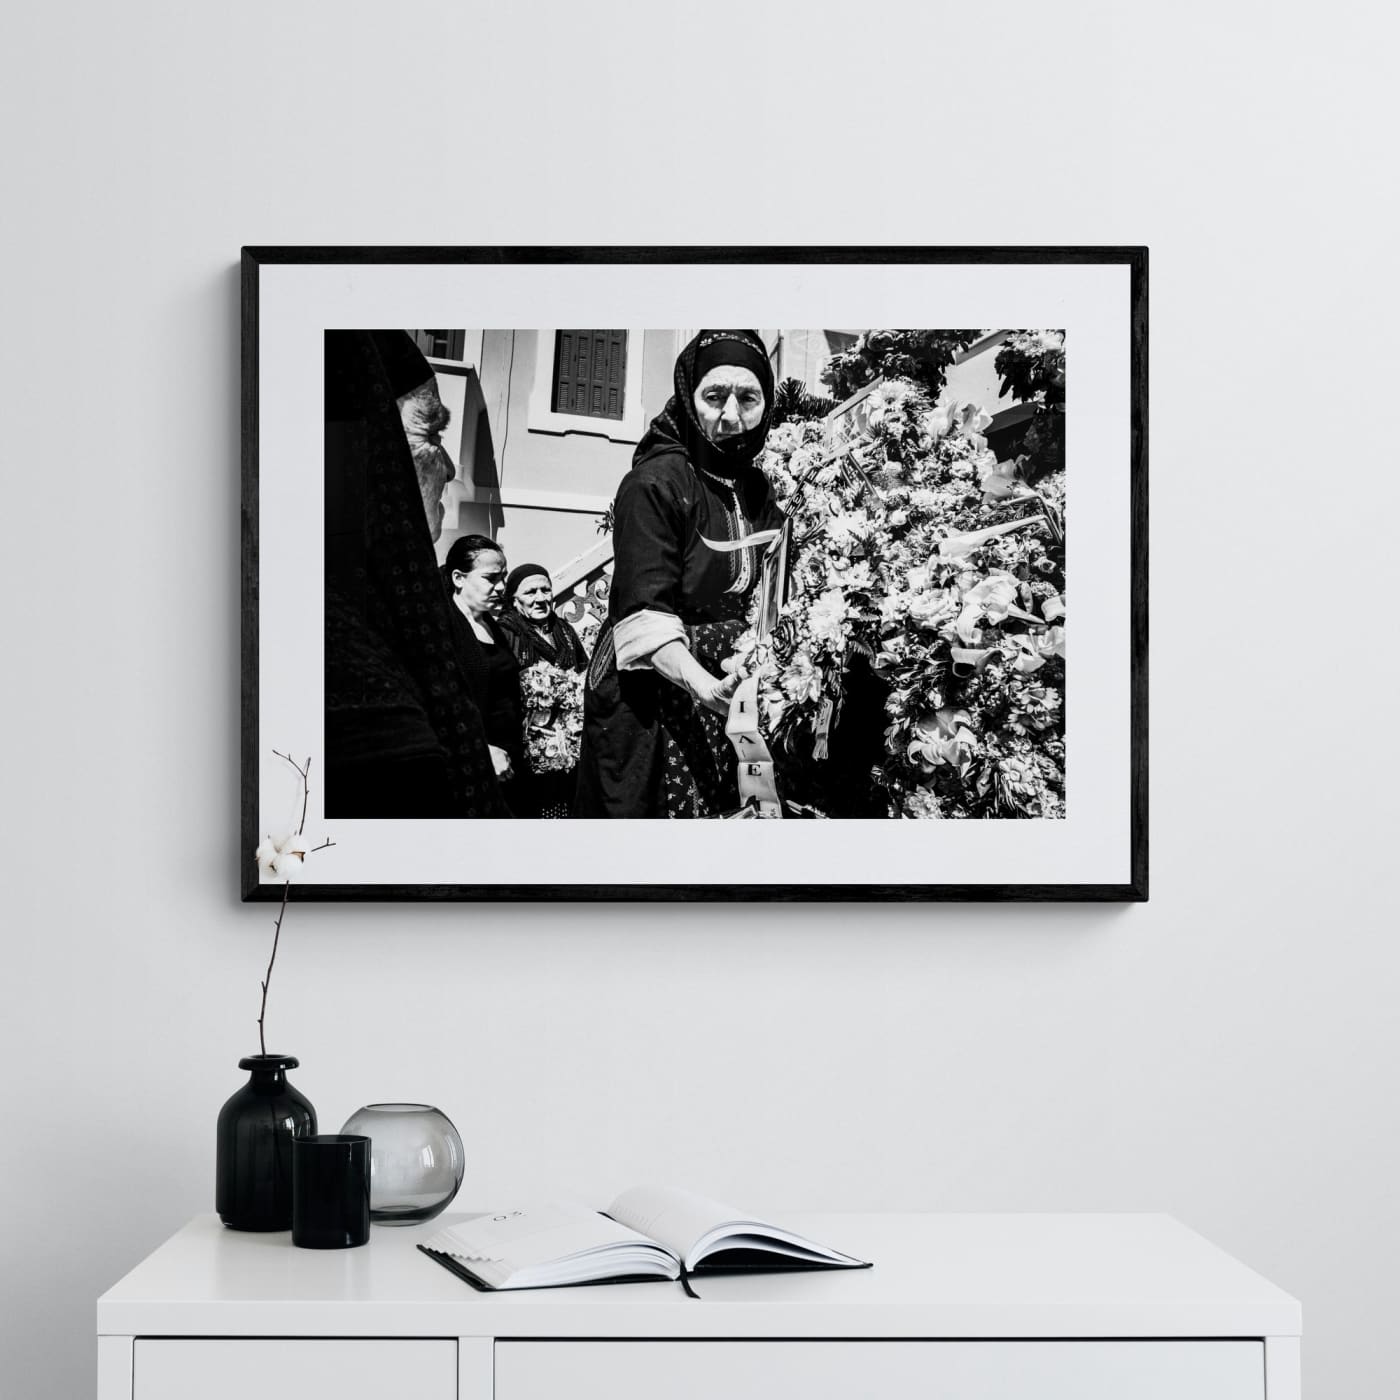 Black and White Photography Wall Art Greece | Woman preparing the Epitaph in her traditional costume Olympos Karpathos Dodecanese by George Tatakis - single framed photo